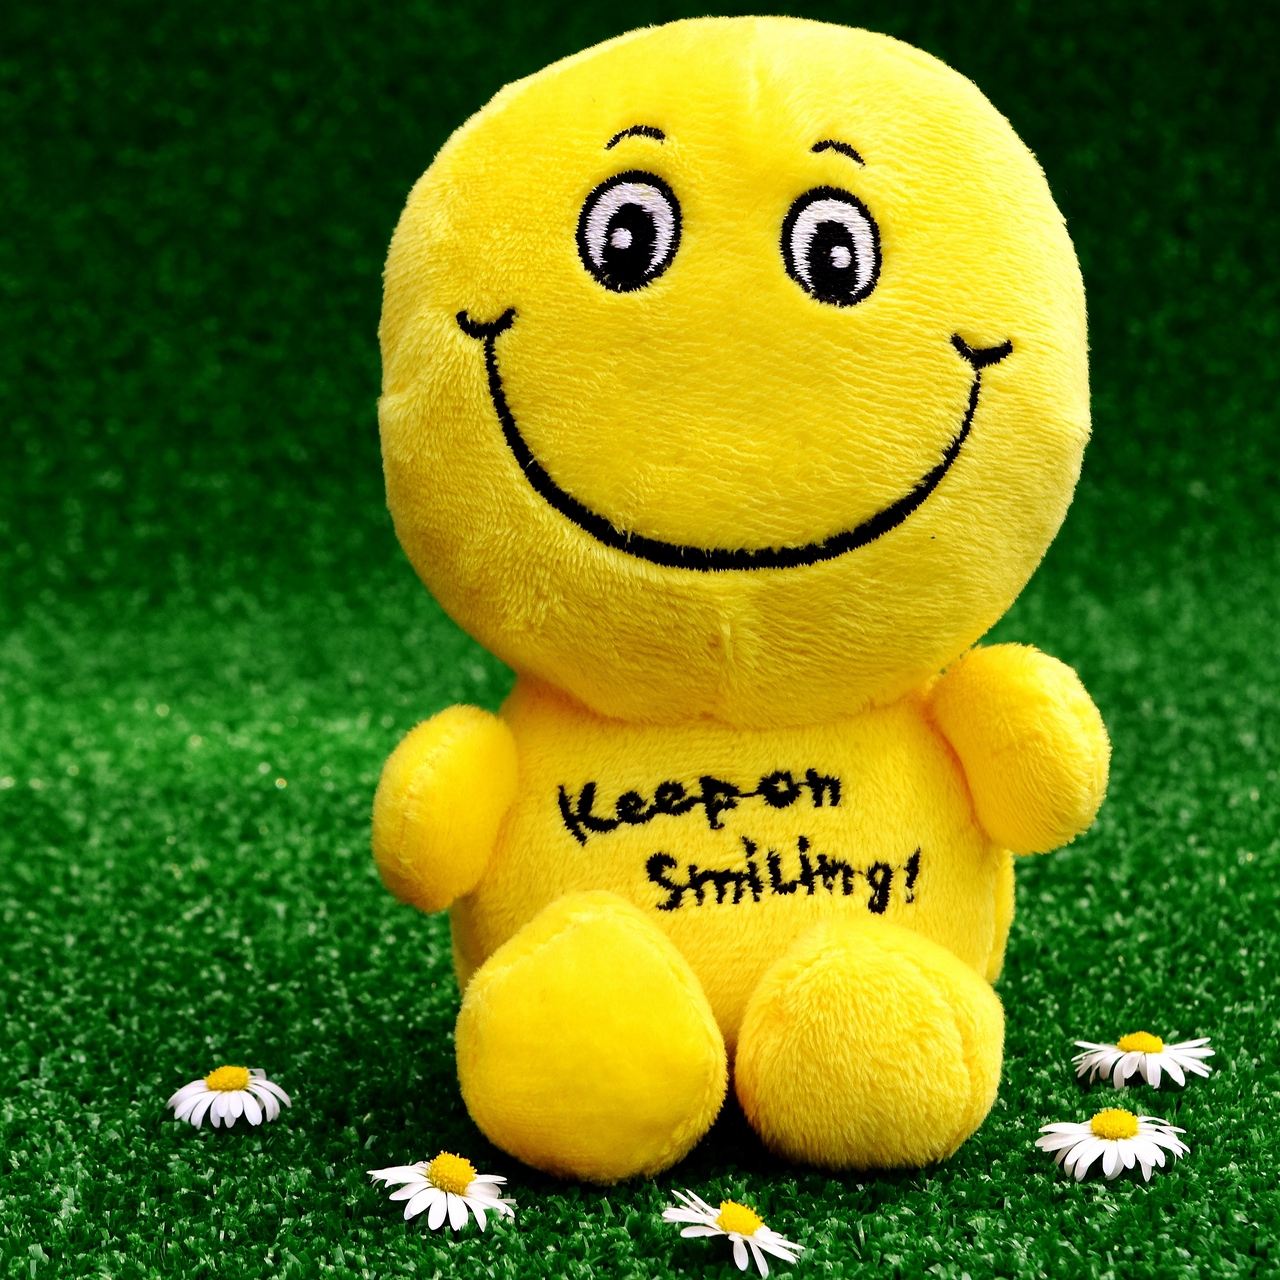 Wallpaper Smiley, Happy, Toy, Funny, Positive - Whatsapp Beautiful Images For Dp , HD Wallpaper & Backgrounds